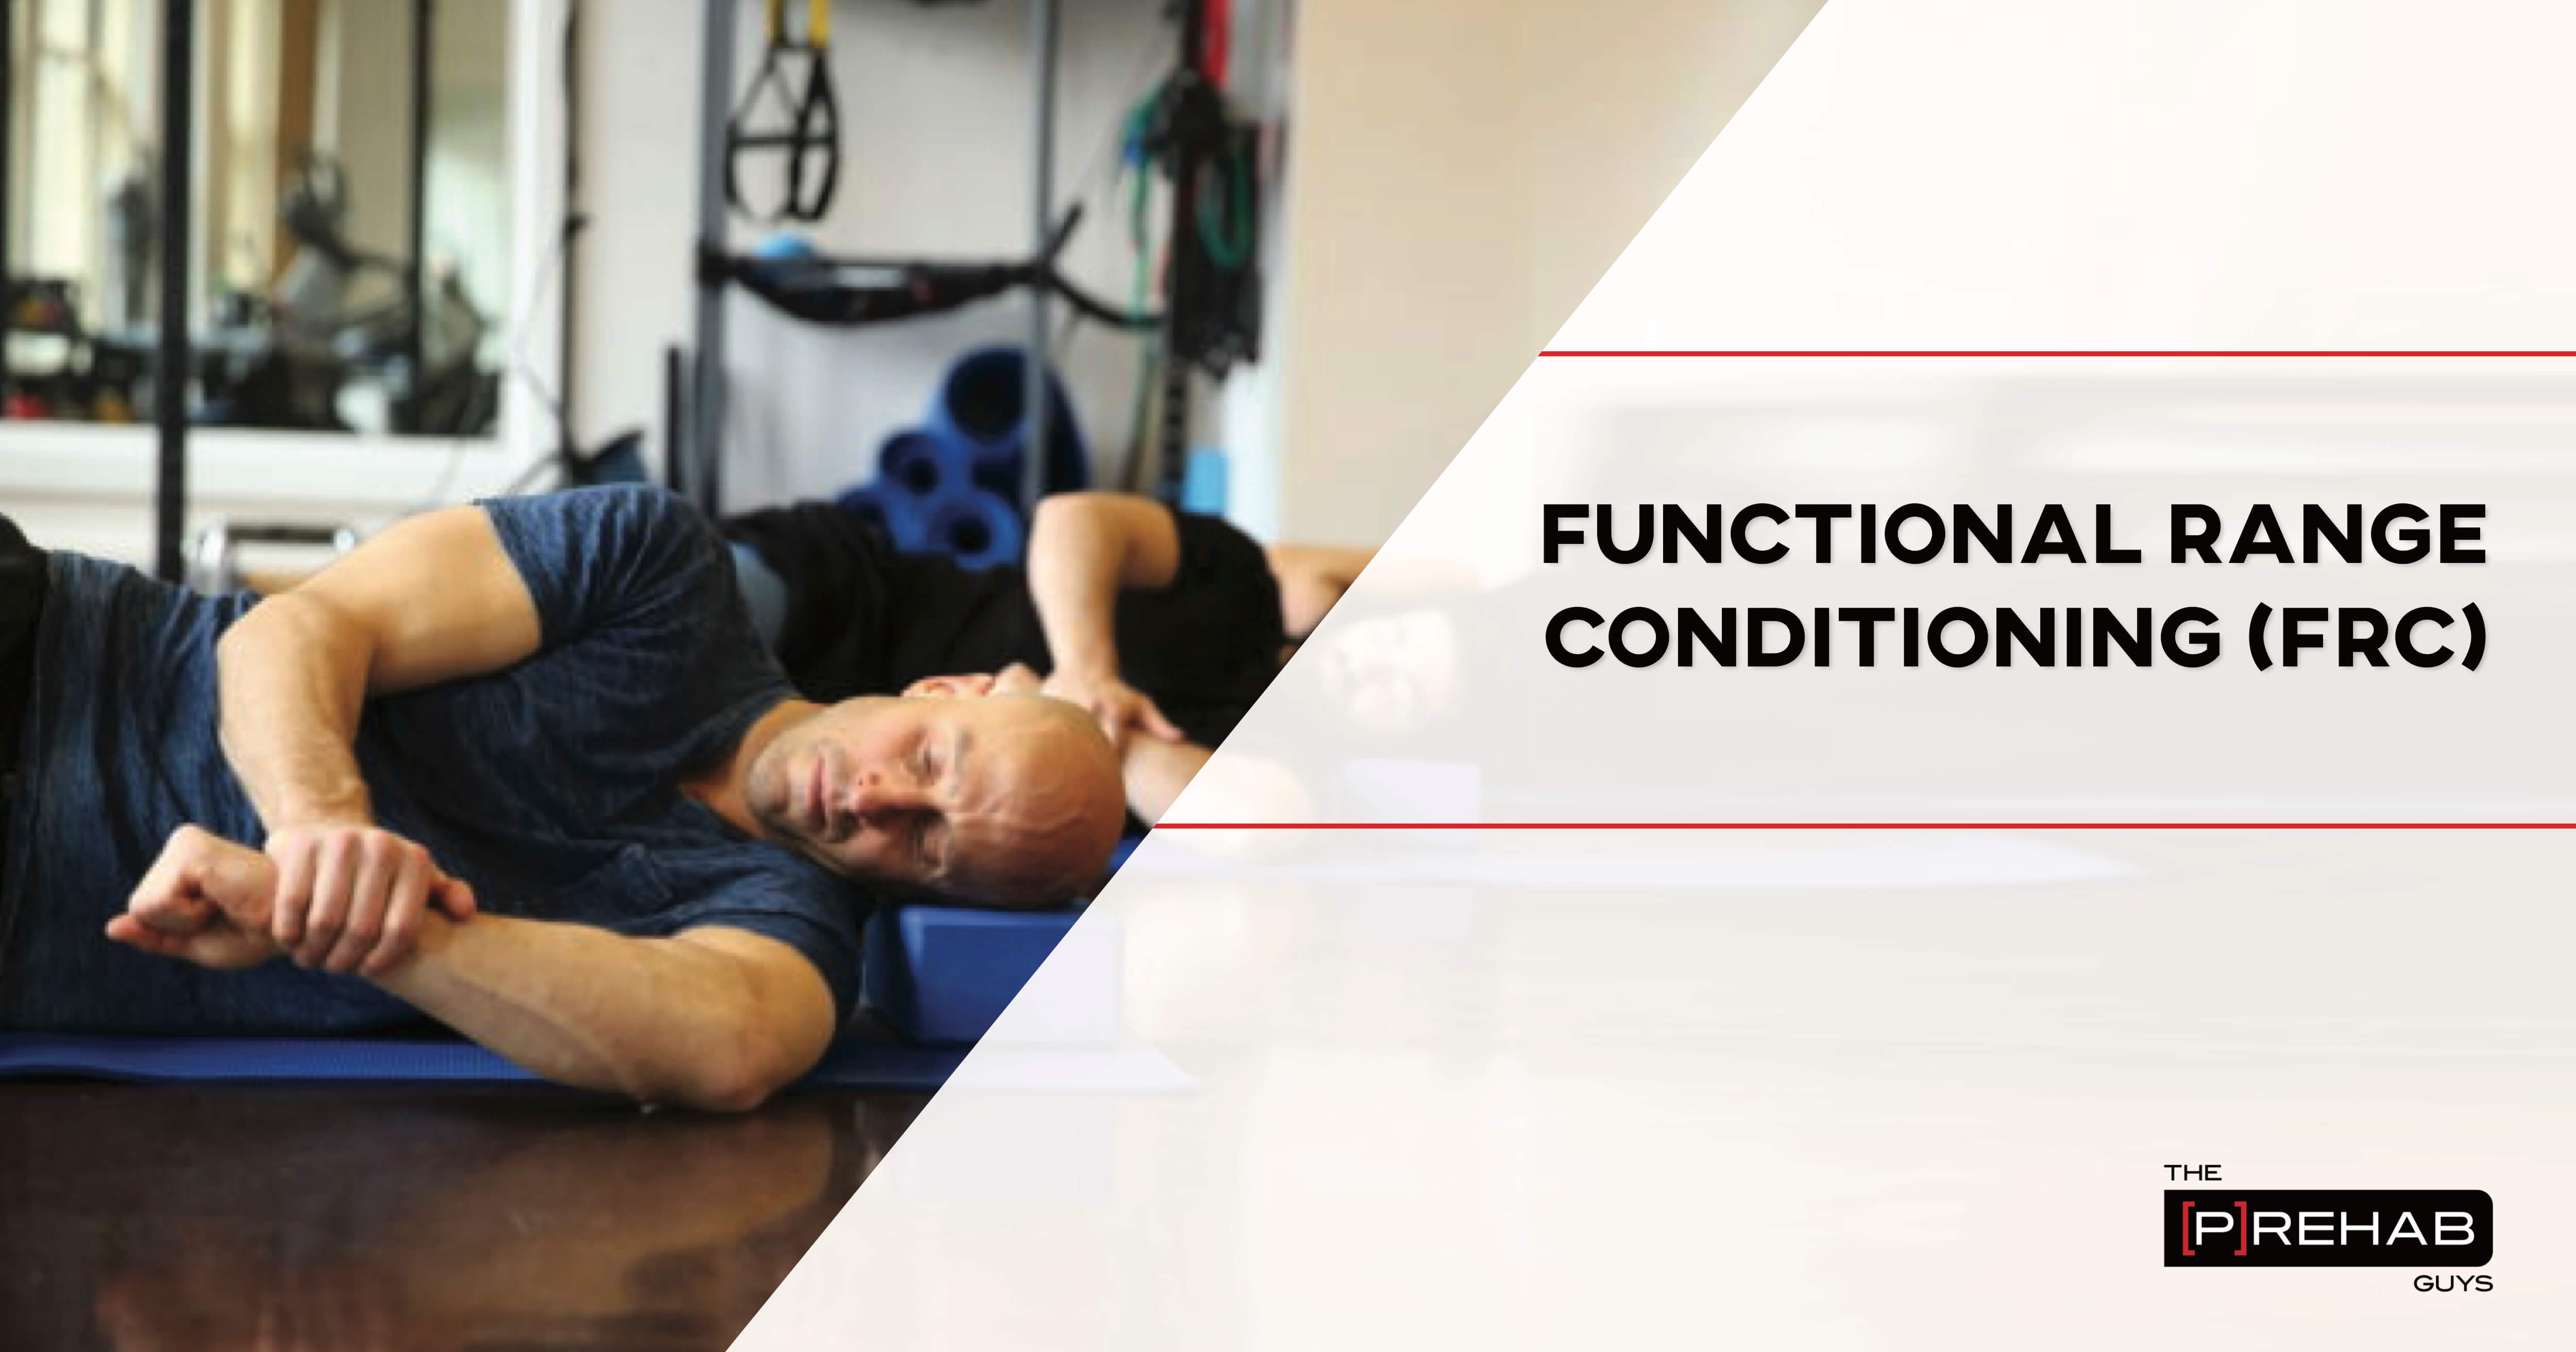 Introduction to Functional Range Conditioning (FRC) 𝗣 𝗥𝗲𝗵𝗮𝗯